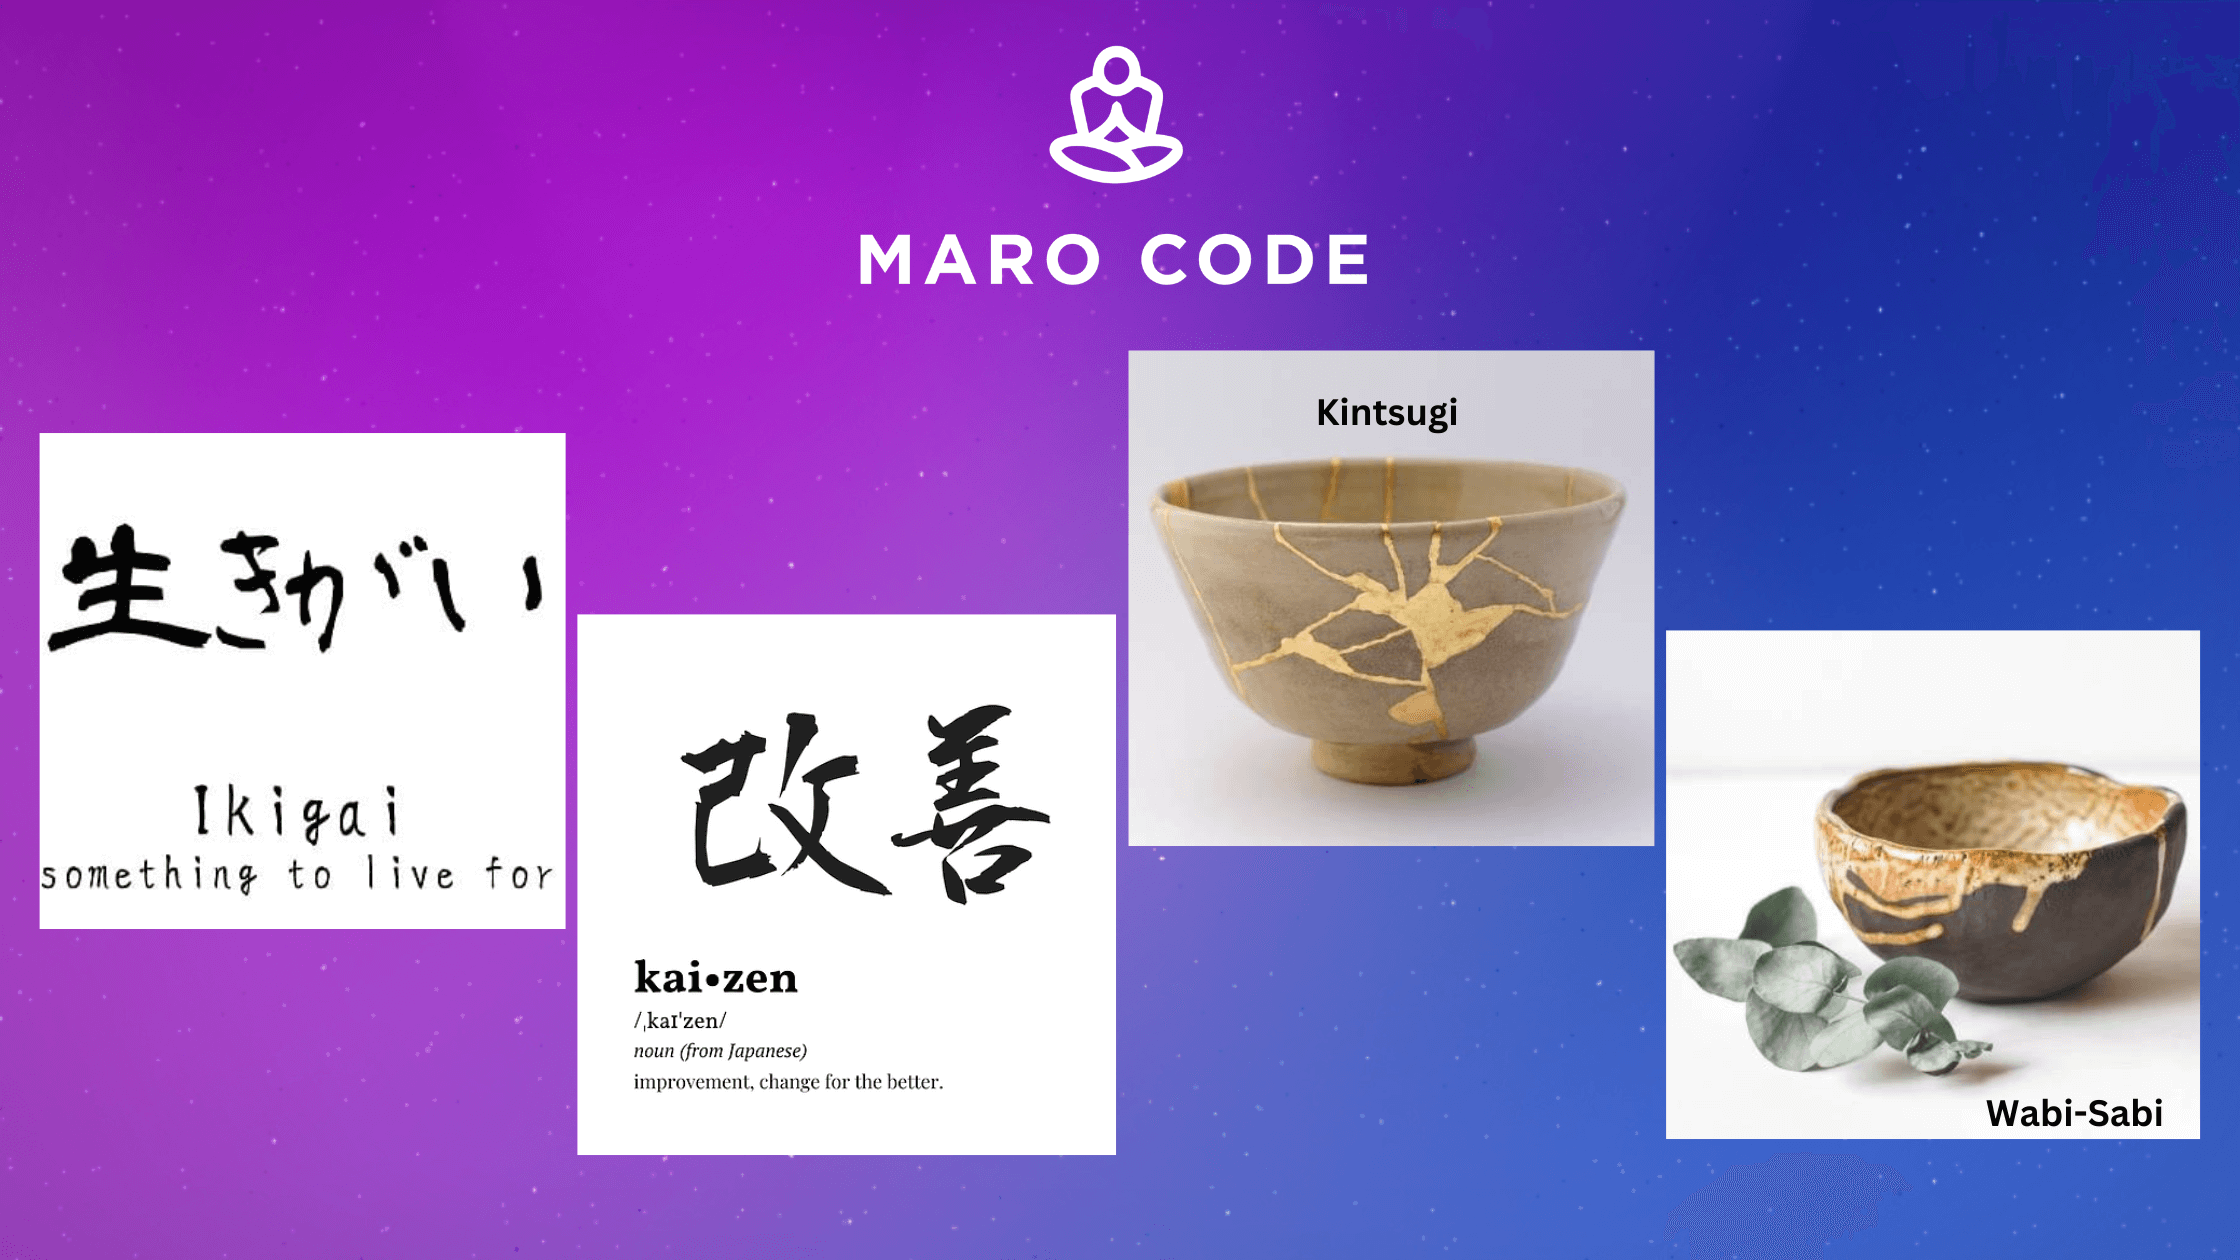 The Maro Code Japanese Concepts